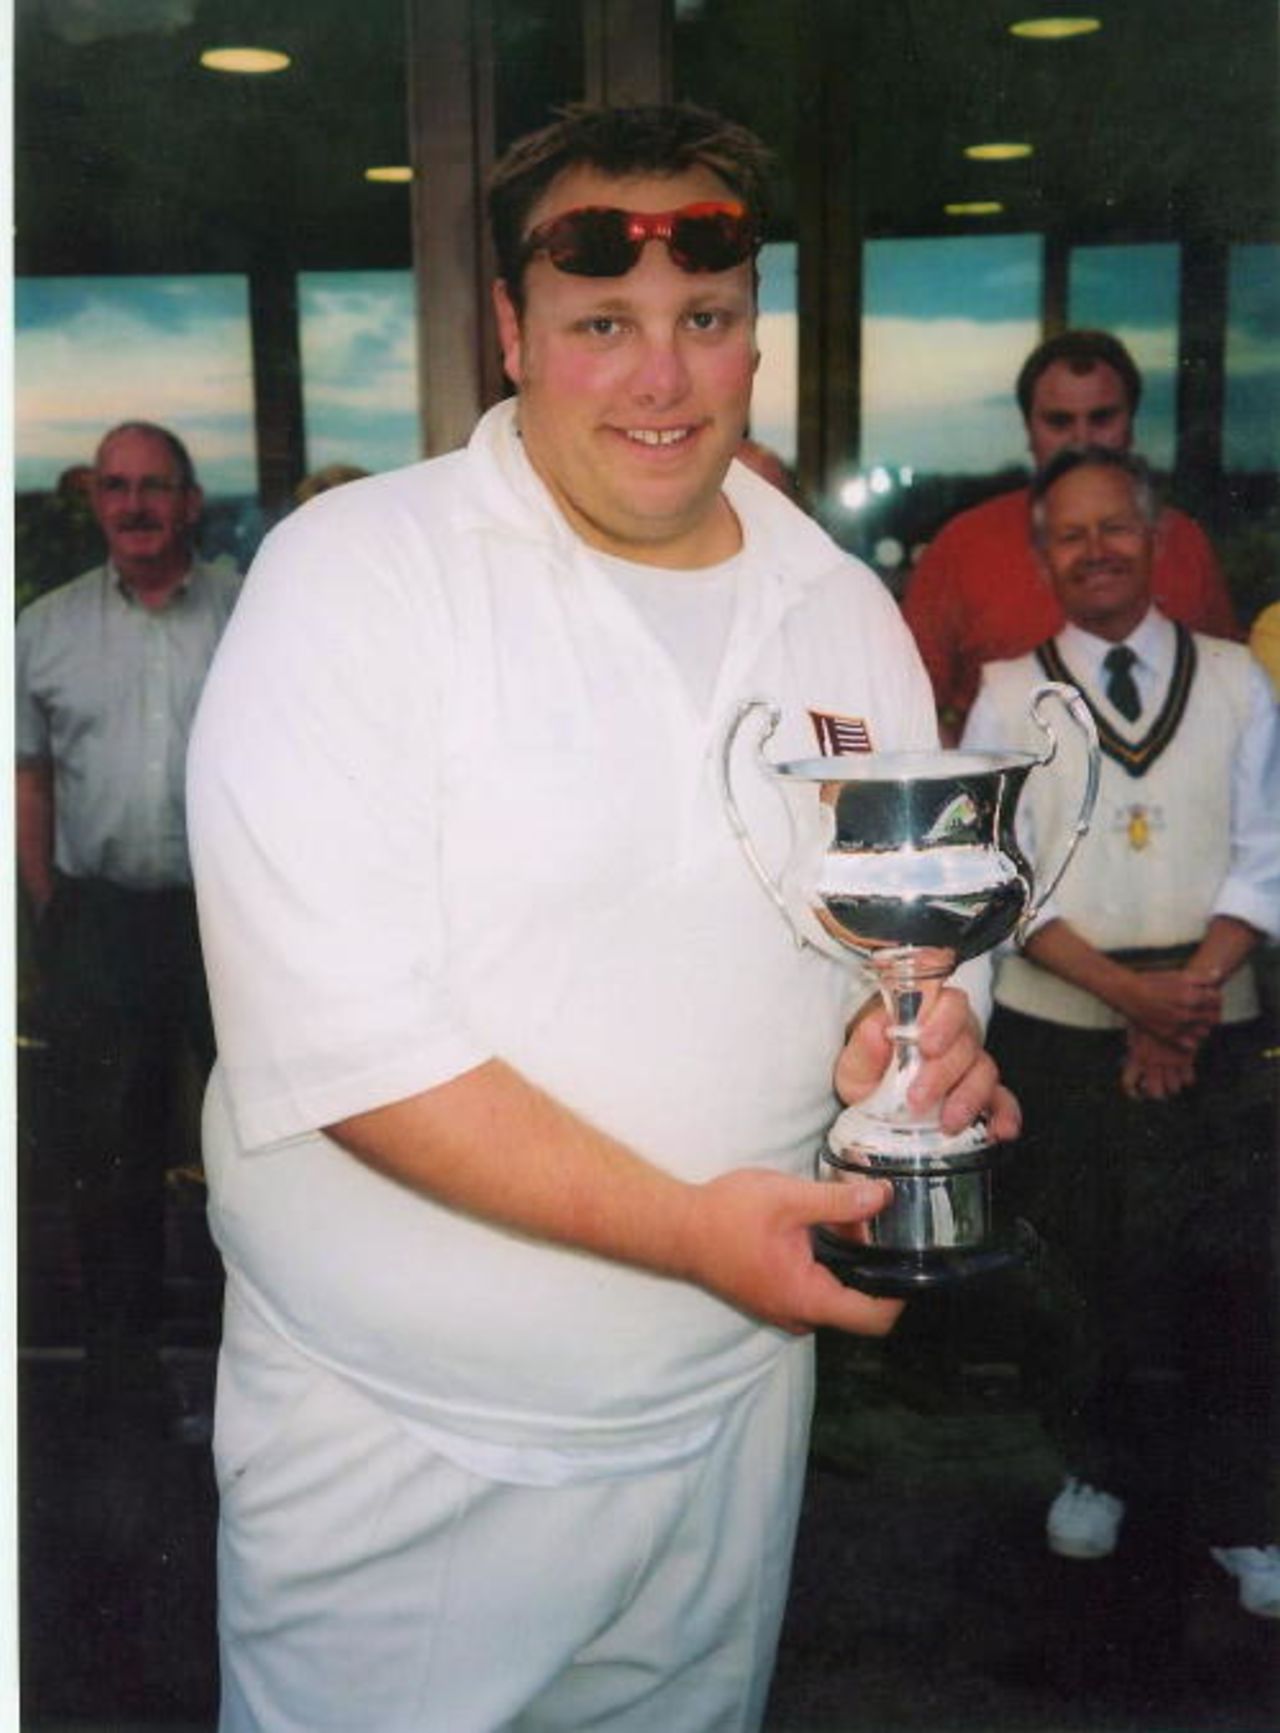 Russell Rowe - South Wilts captain with SEC Trophy after defeating Bashley in the Final at The Rose Bowl